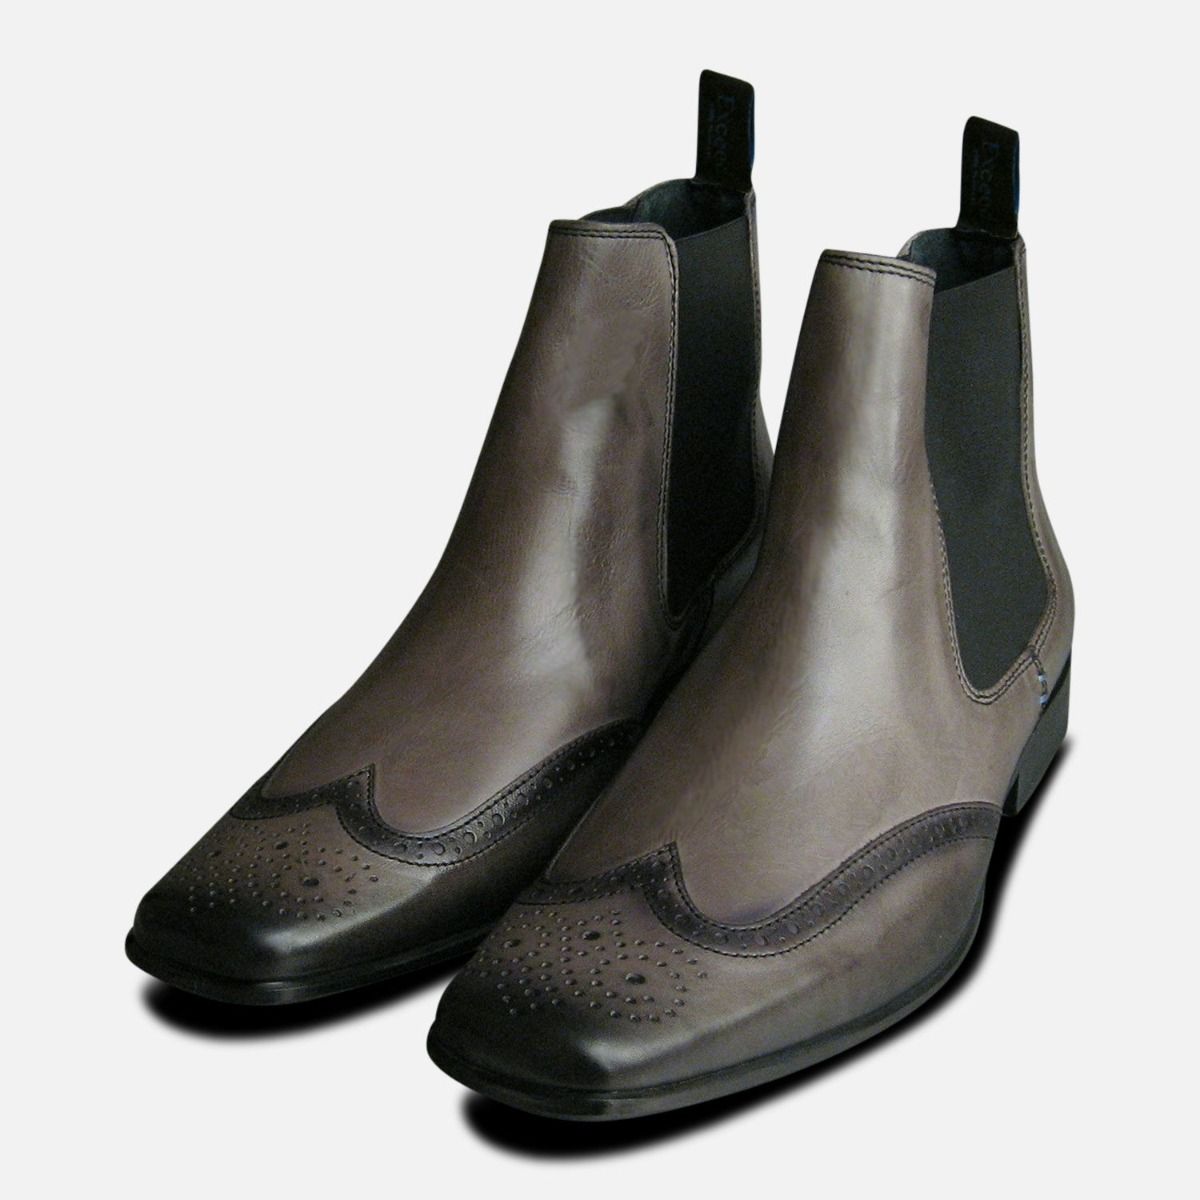 dynasty chapter Elasticity Exceed Grey Leather Mens Chelsea Boots